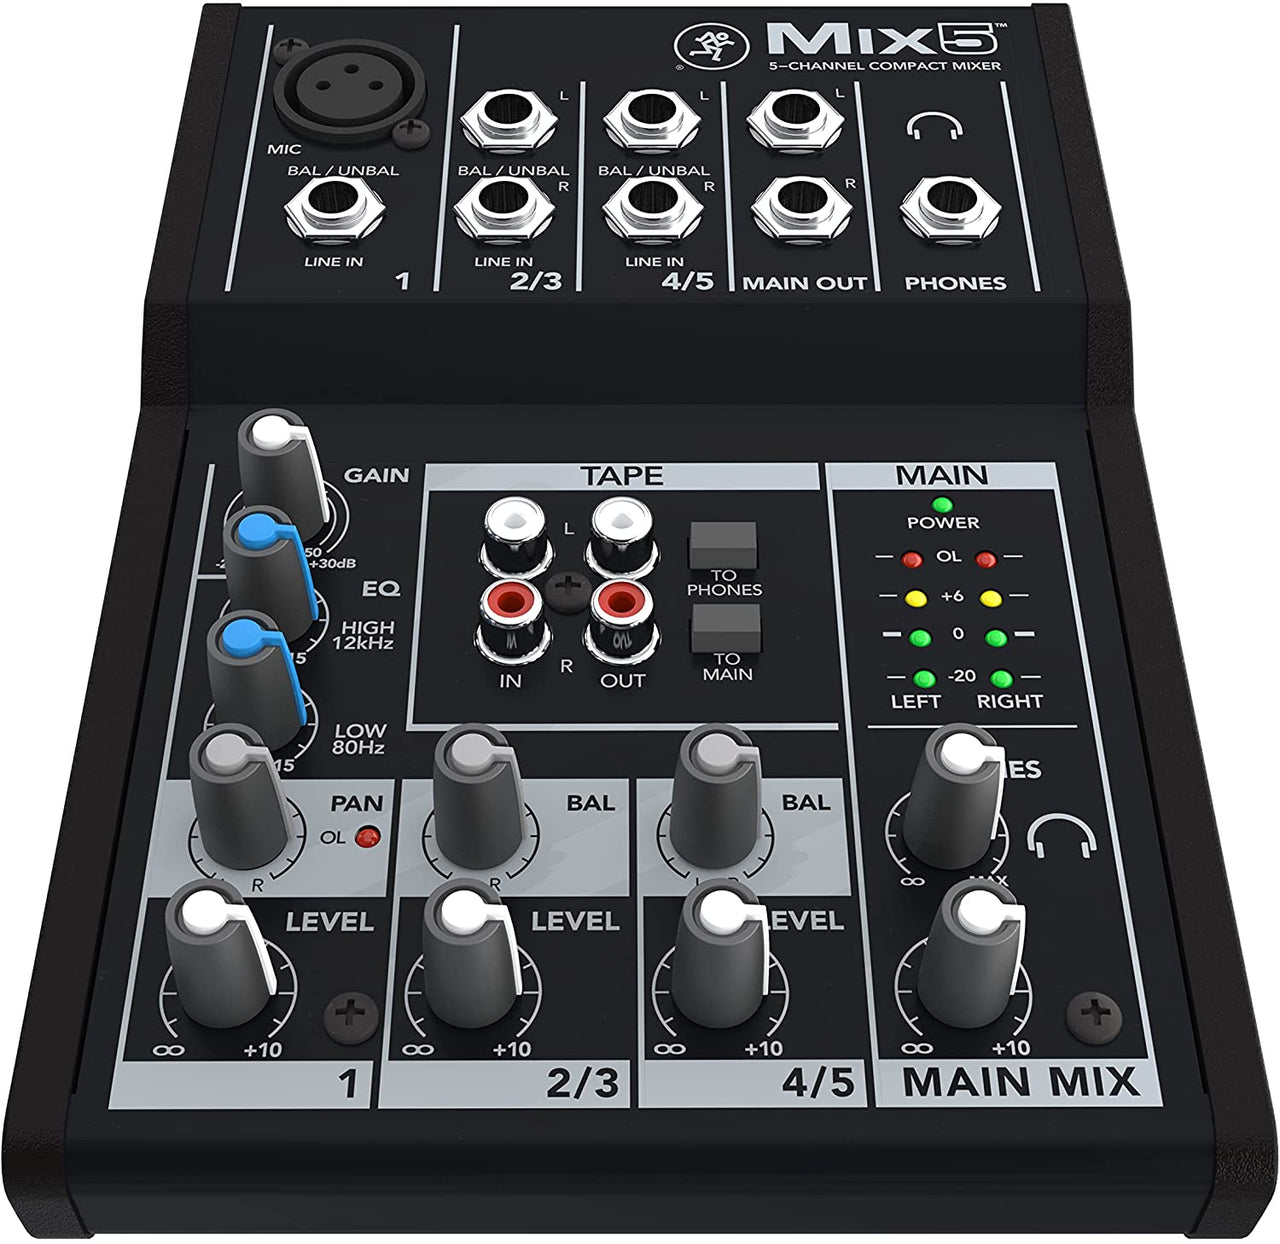 Mackie Mix8 Mix Series, 8-Channel Compact Mixer with Studio-Level Audio Quality